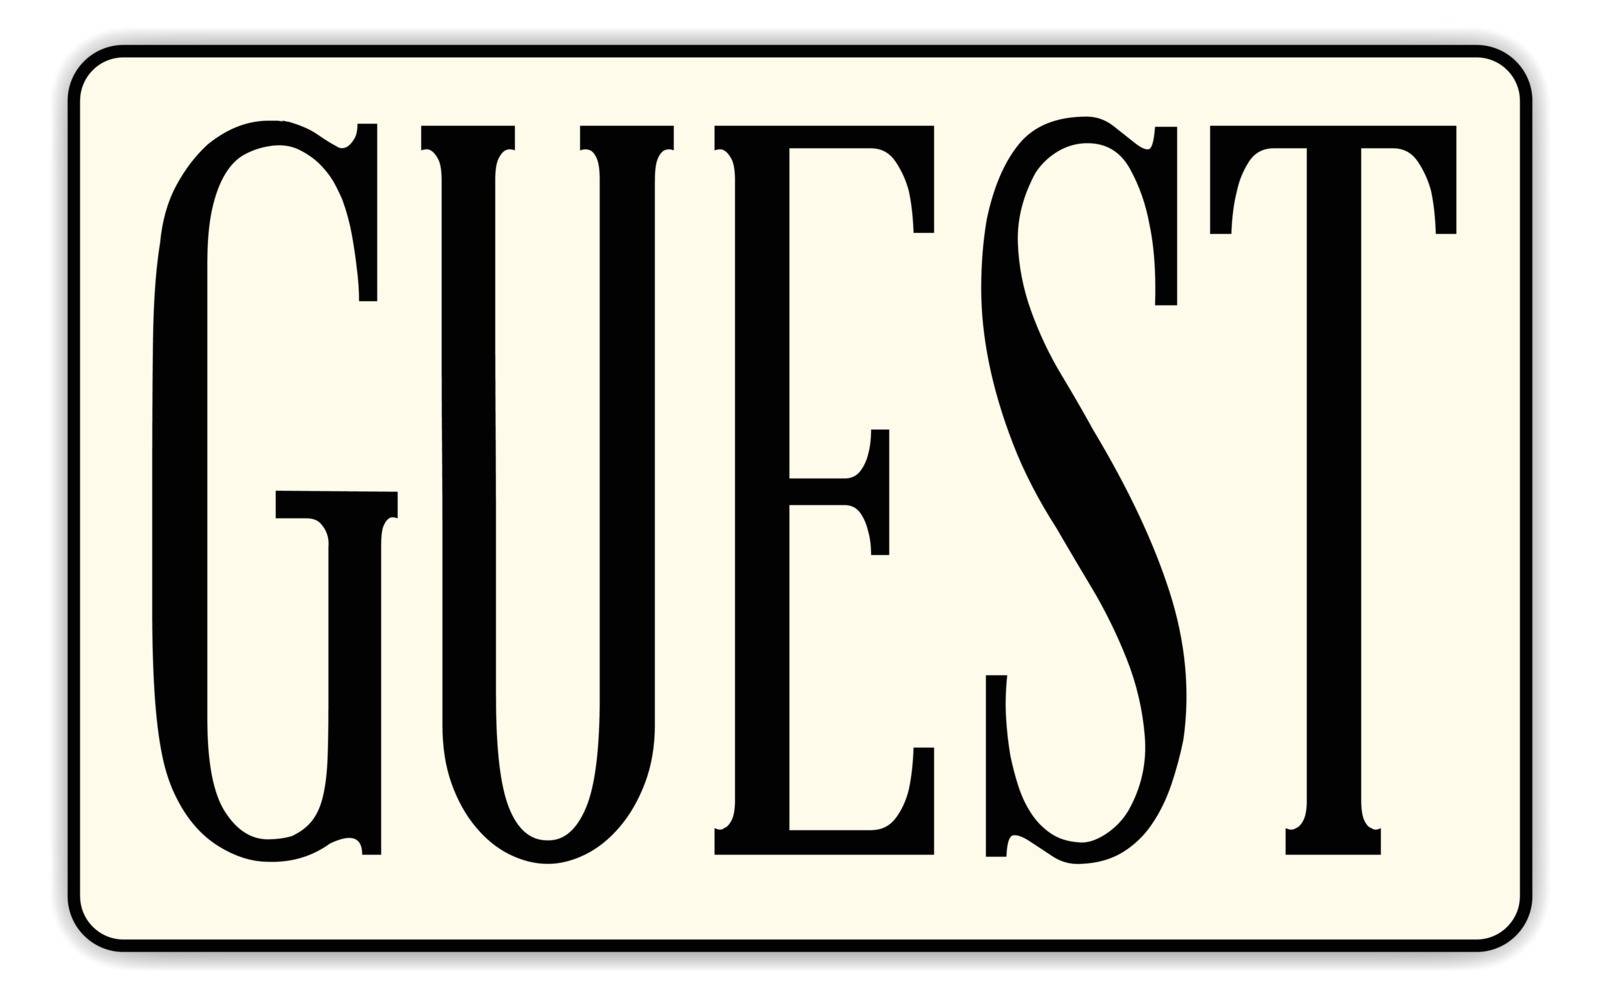 A guest badge with text over a white background